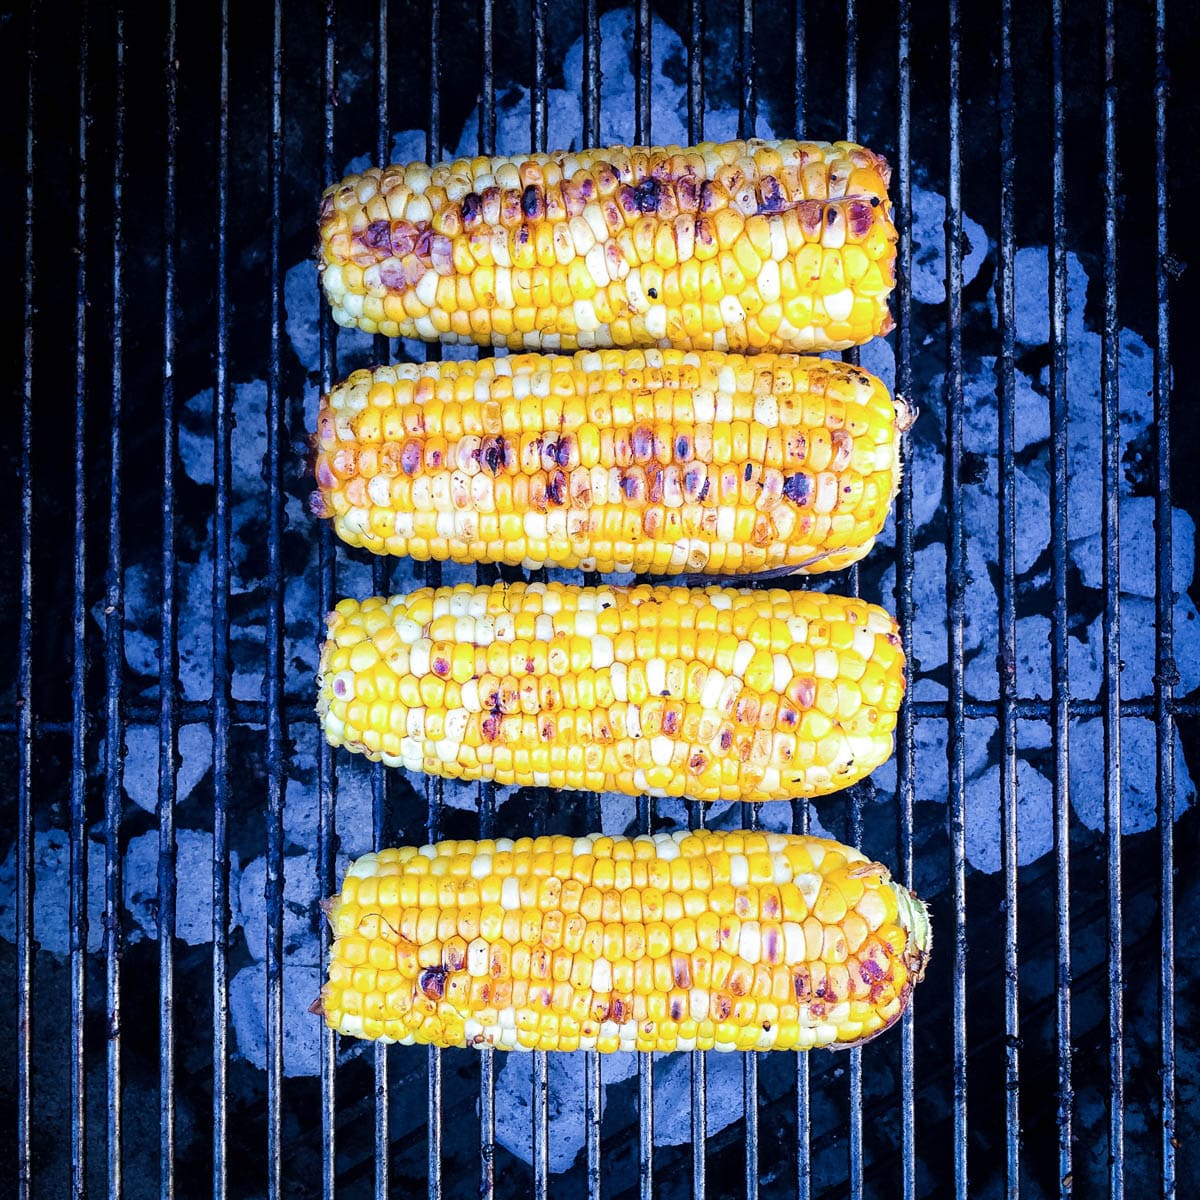 Four ears of corn grilling on a charcoal grill.